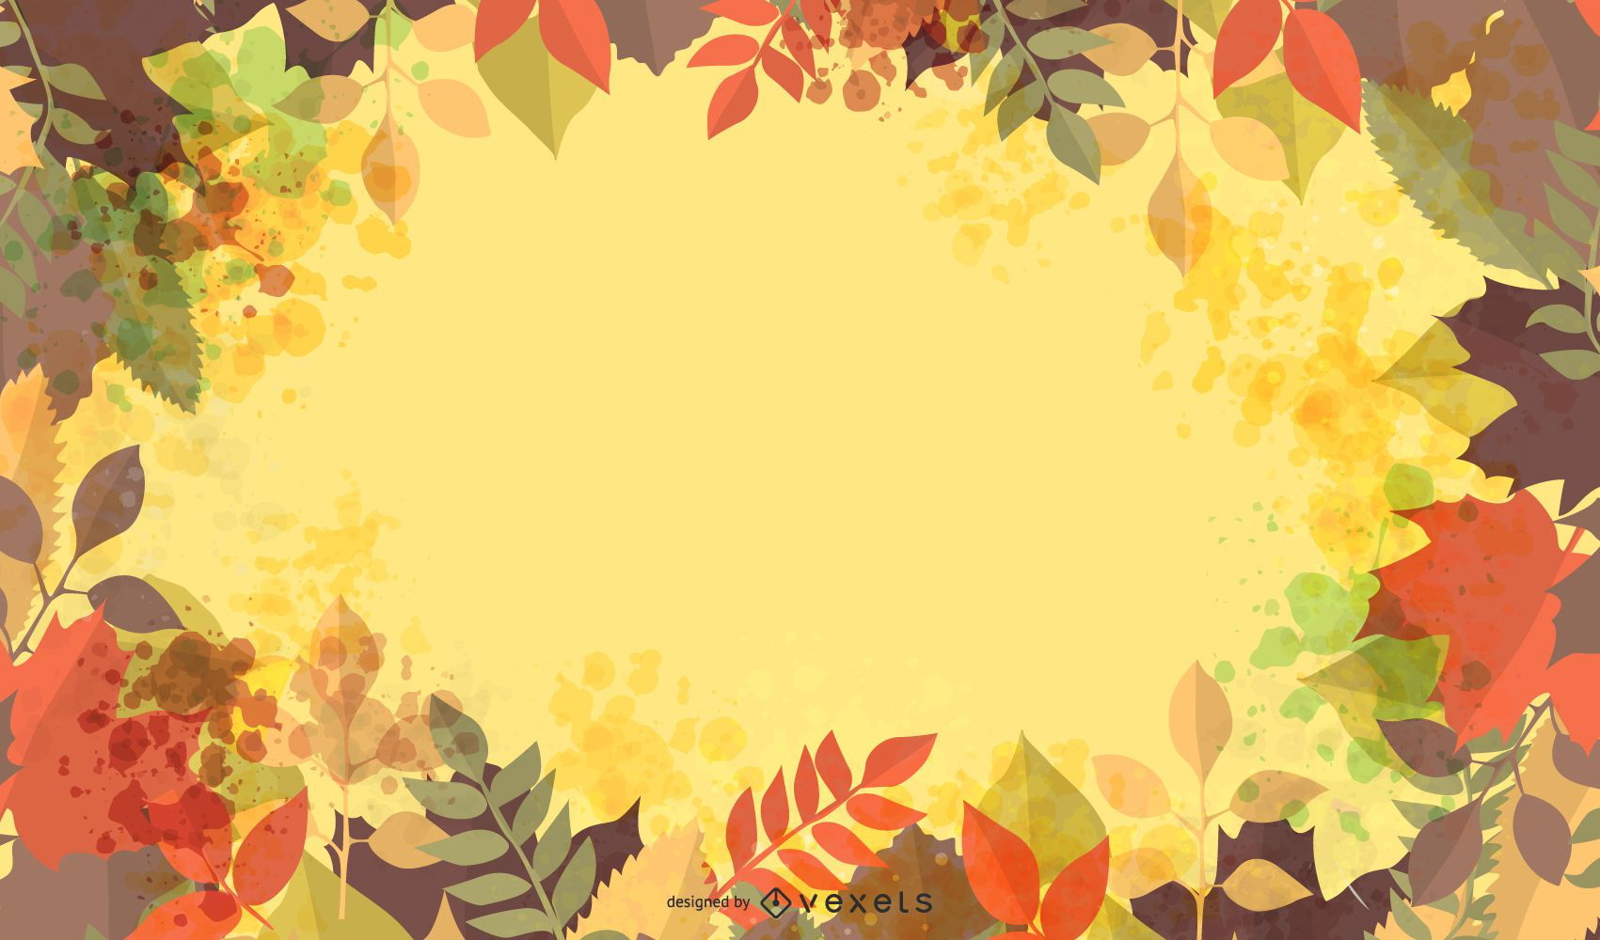 Autumn Leaves Frame with Grungy Splats